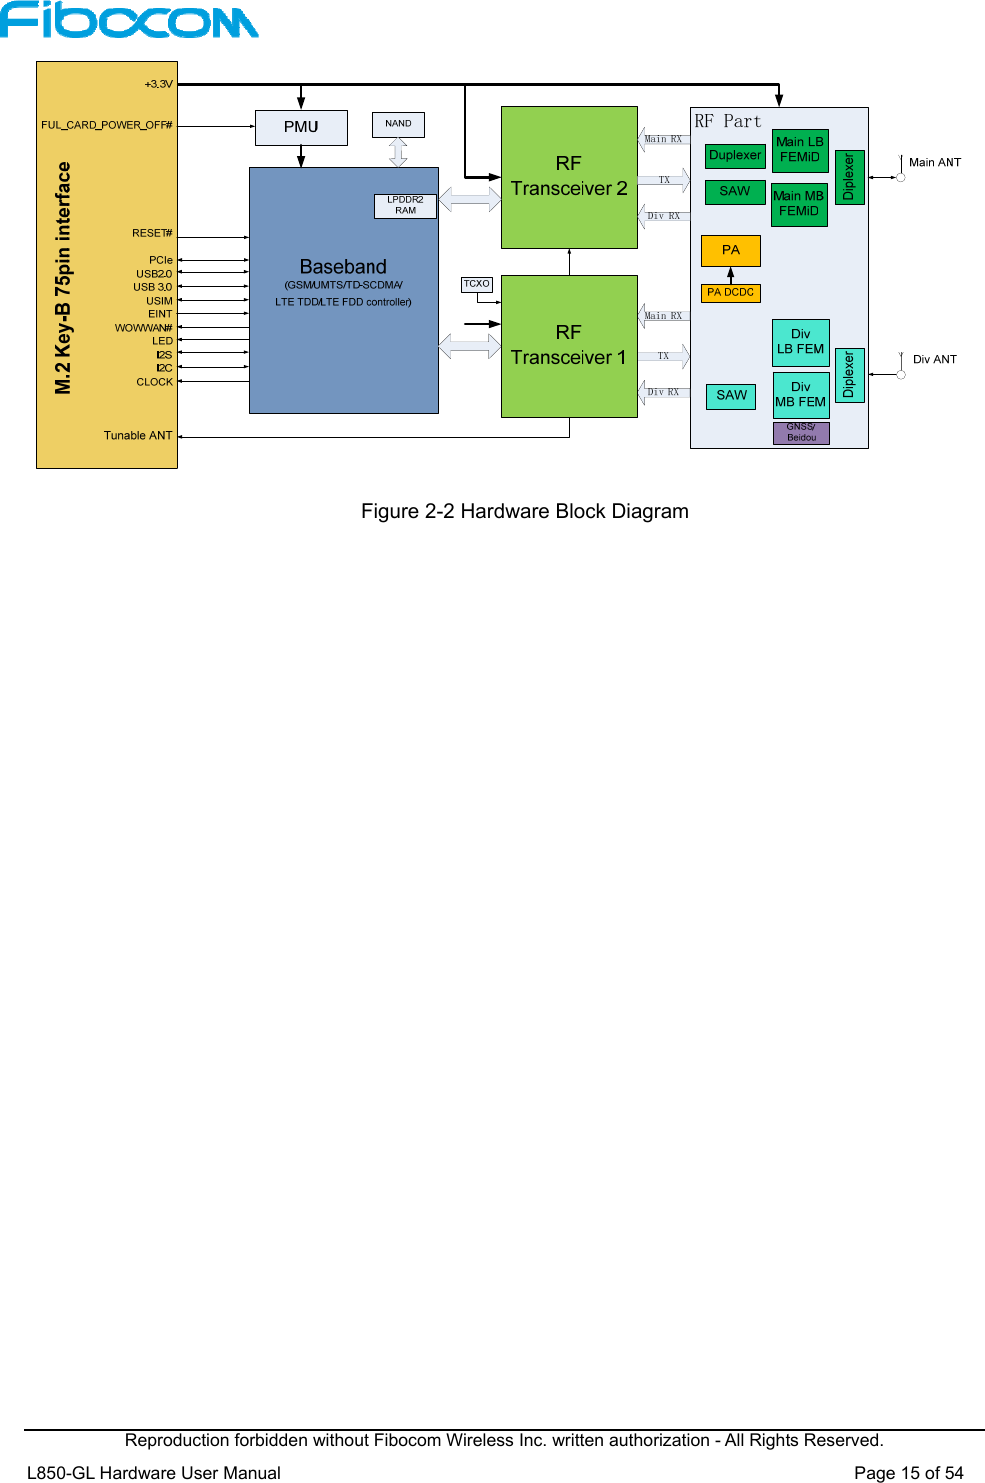  Reproduction forbidden without Fibocom Wireless Inc. written authorization - All Rights Reserved. L850-GL Hardware User Manual                                                                 Page 15 of 54  Figure 2-2 Hardware Block Diagram 